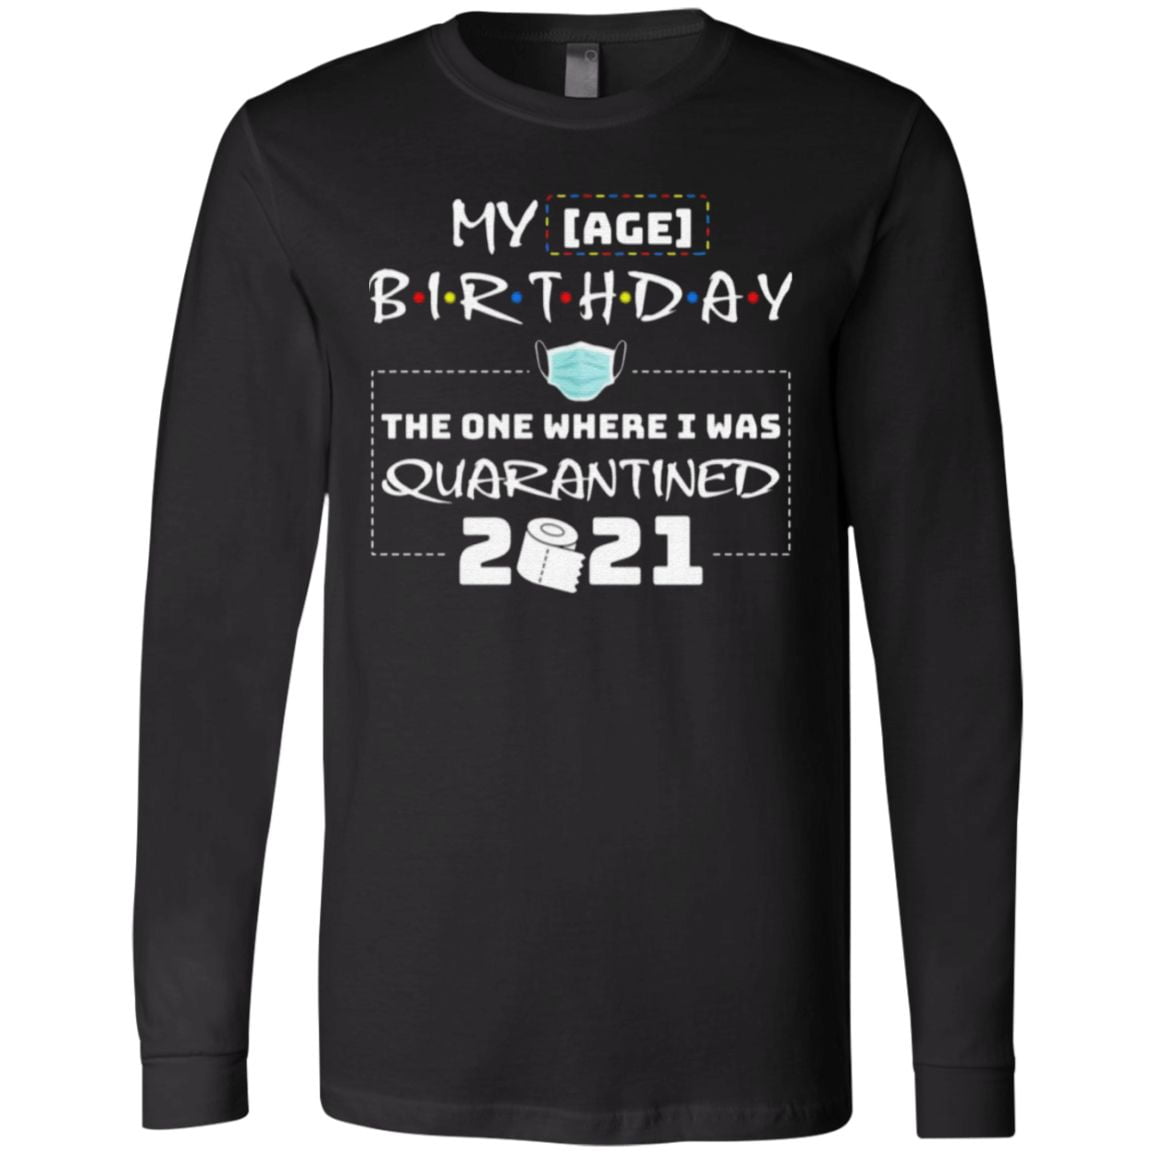 My Birthday The One Where I Was Quarantined 2021 T-Shirt